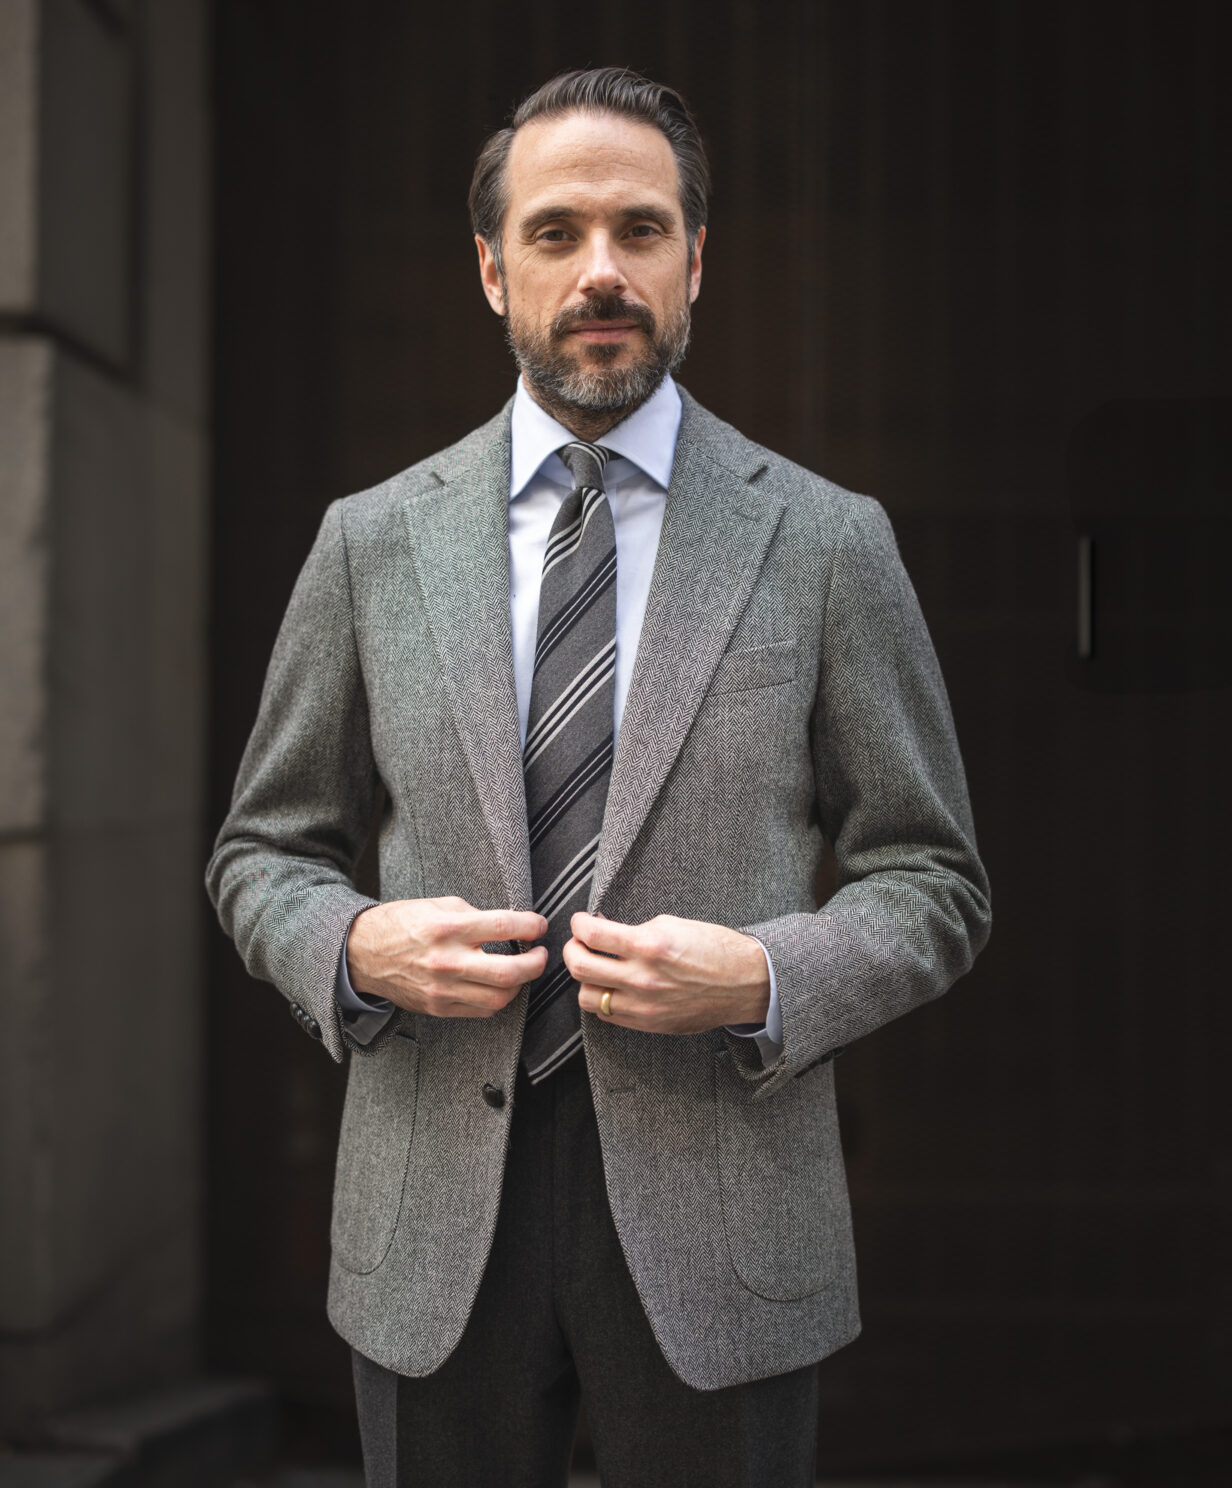 Gray Tweed Sport Coat Business Casual Outfit With Tie | He Spoke Style